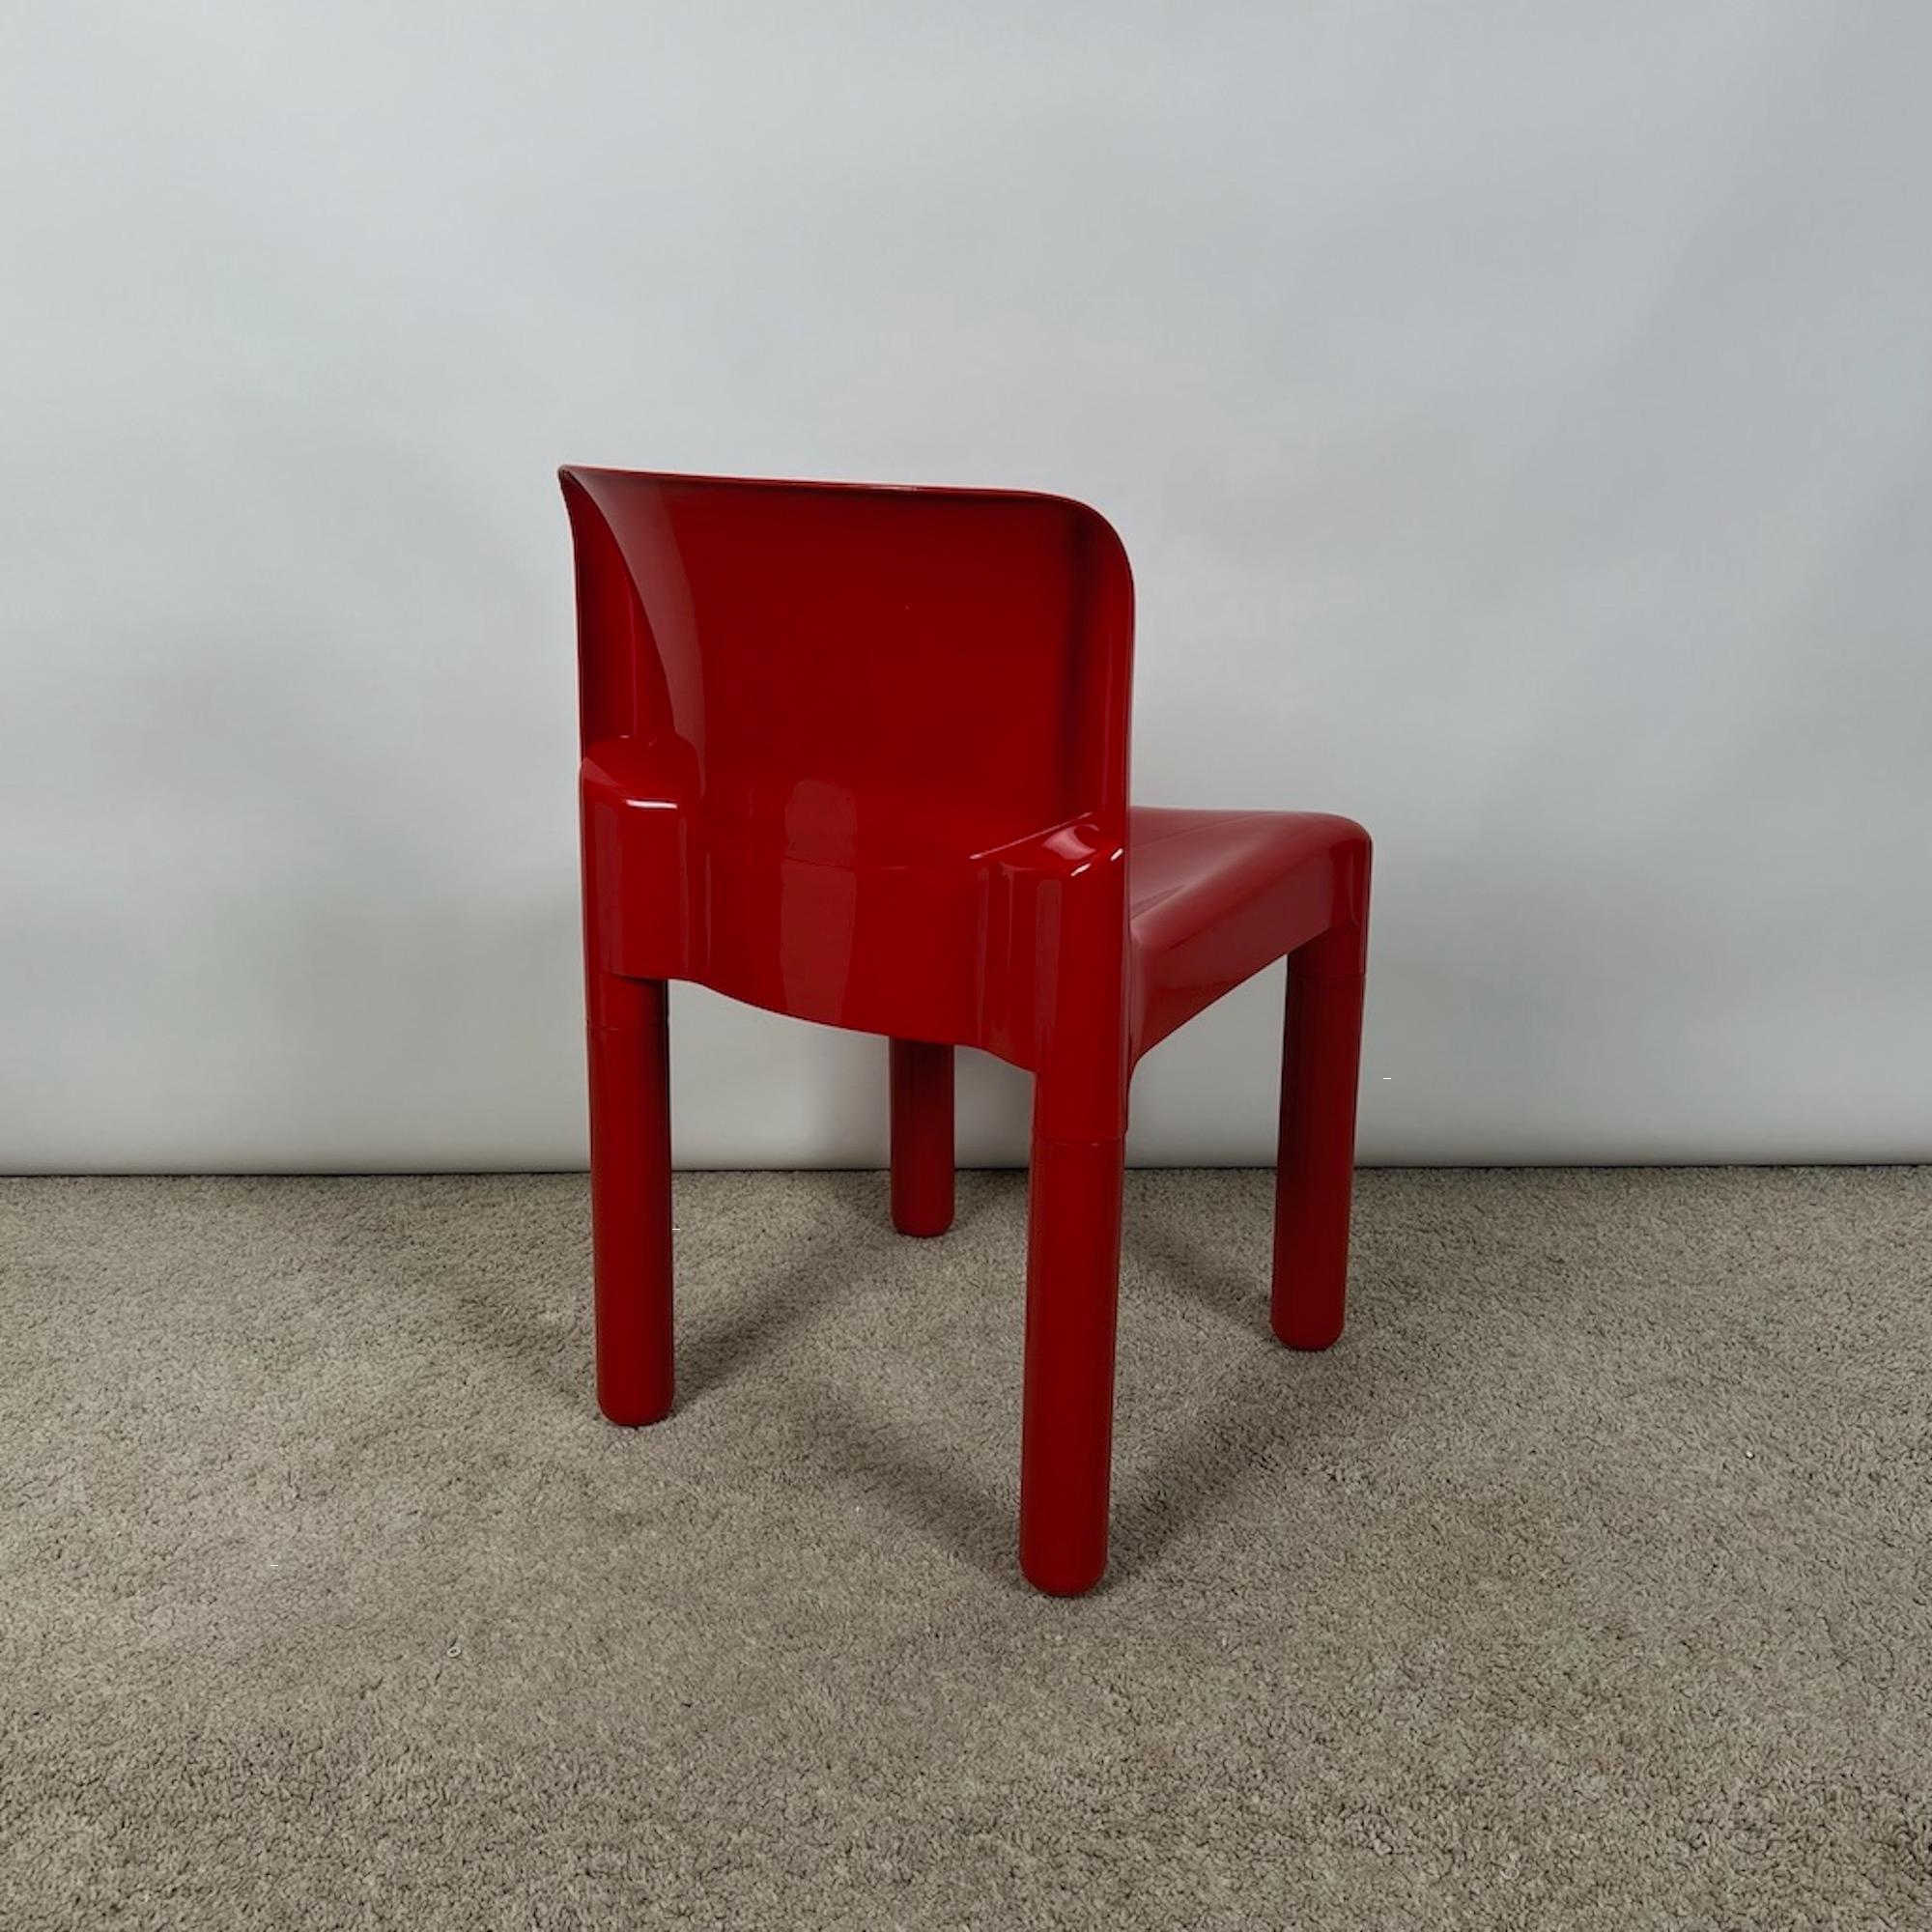 Beautiful and rare chair designed by Carlo Bartoli for Kartell in a glossy red hue.

The model 4875 chair is the first chair in the world made of injection – molded polypropylene. Carlo Bartoli designed it in 1970, Kartell started production in 1974